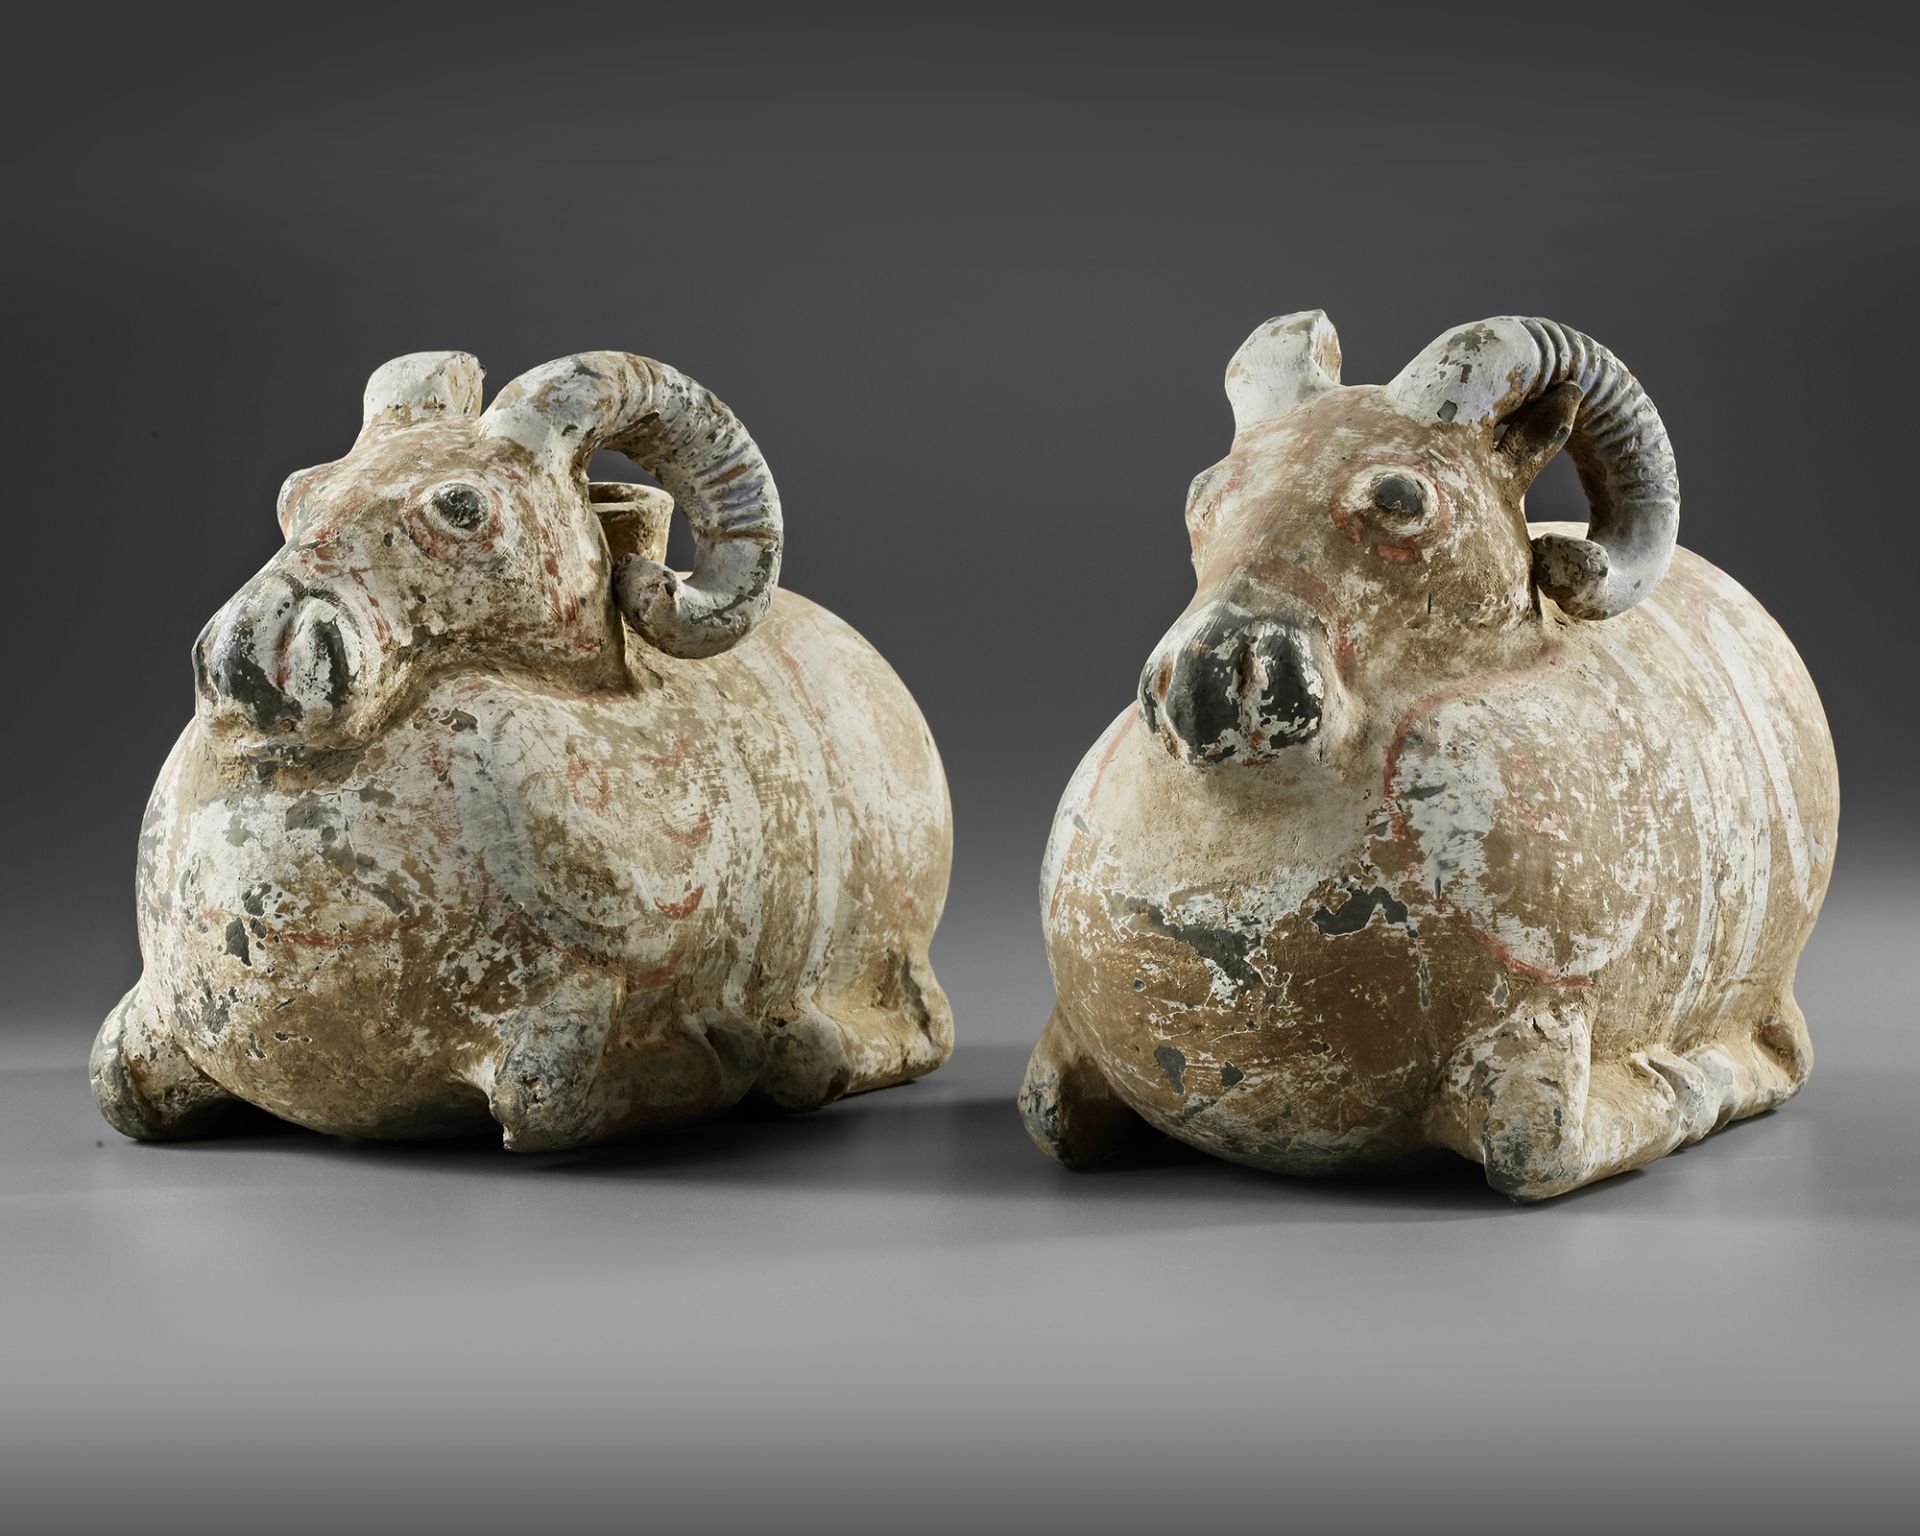 A PAIR OF TERRACOTTA VESSELS IN THE FORM OF A RAM, HAN DYNASTY (206 BC-220 AD) - Image 2 of 6